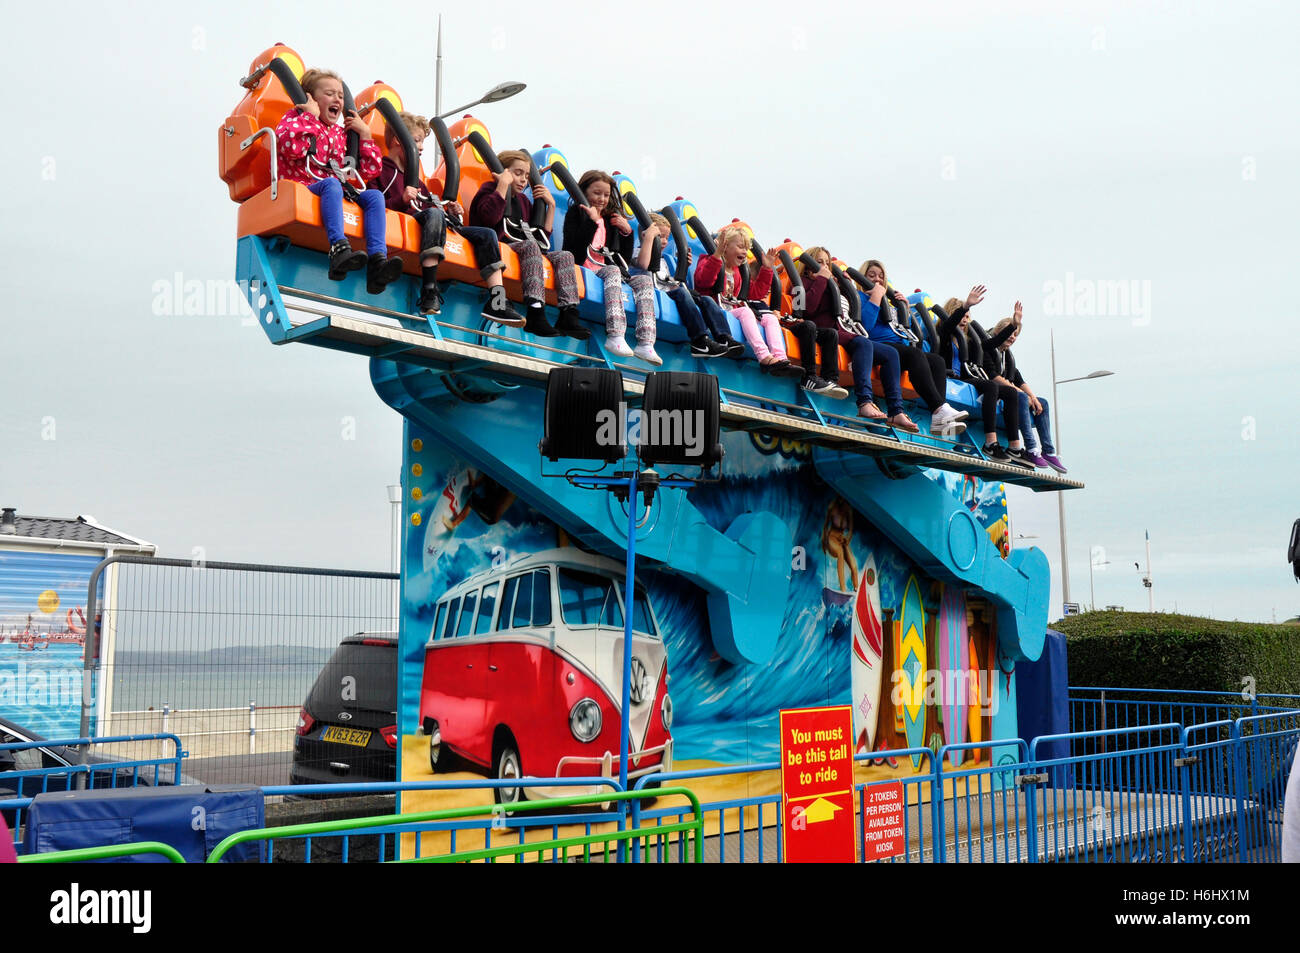 Sea front fairground -  children on a scary sky ride  - excited faces - waving hands - sunlight blue sky - Weymouth Dorset Stock Photo